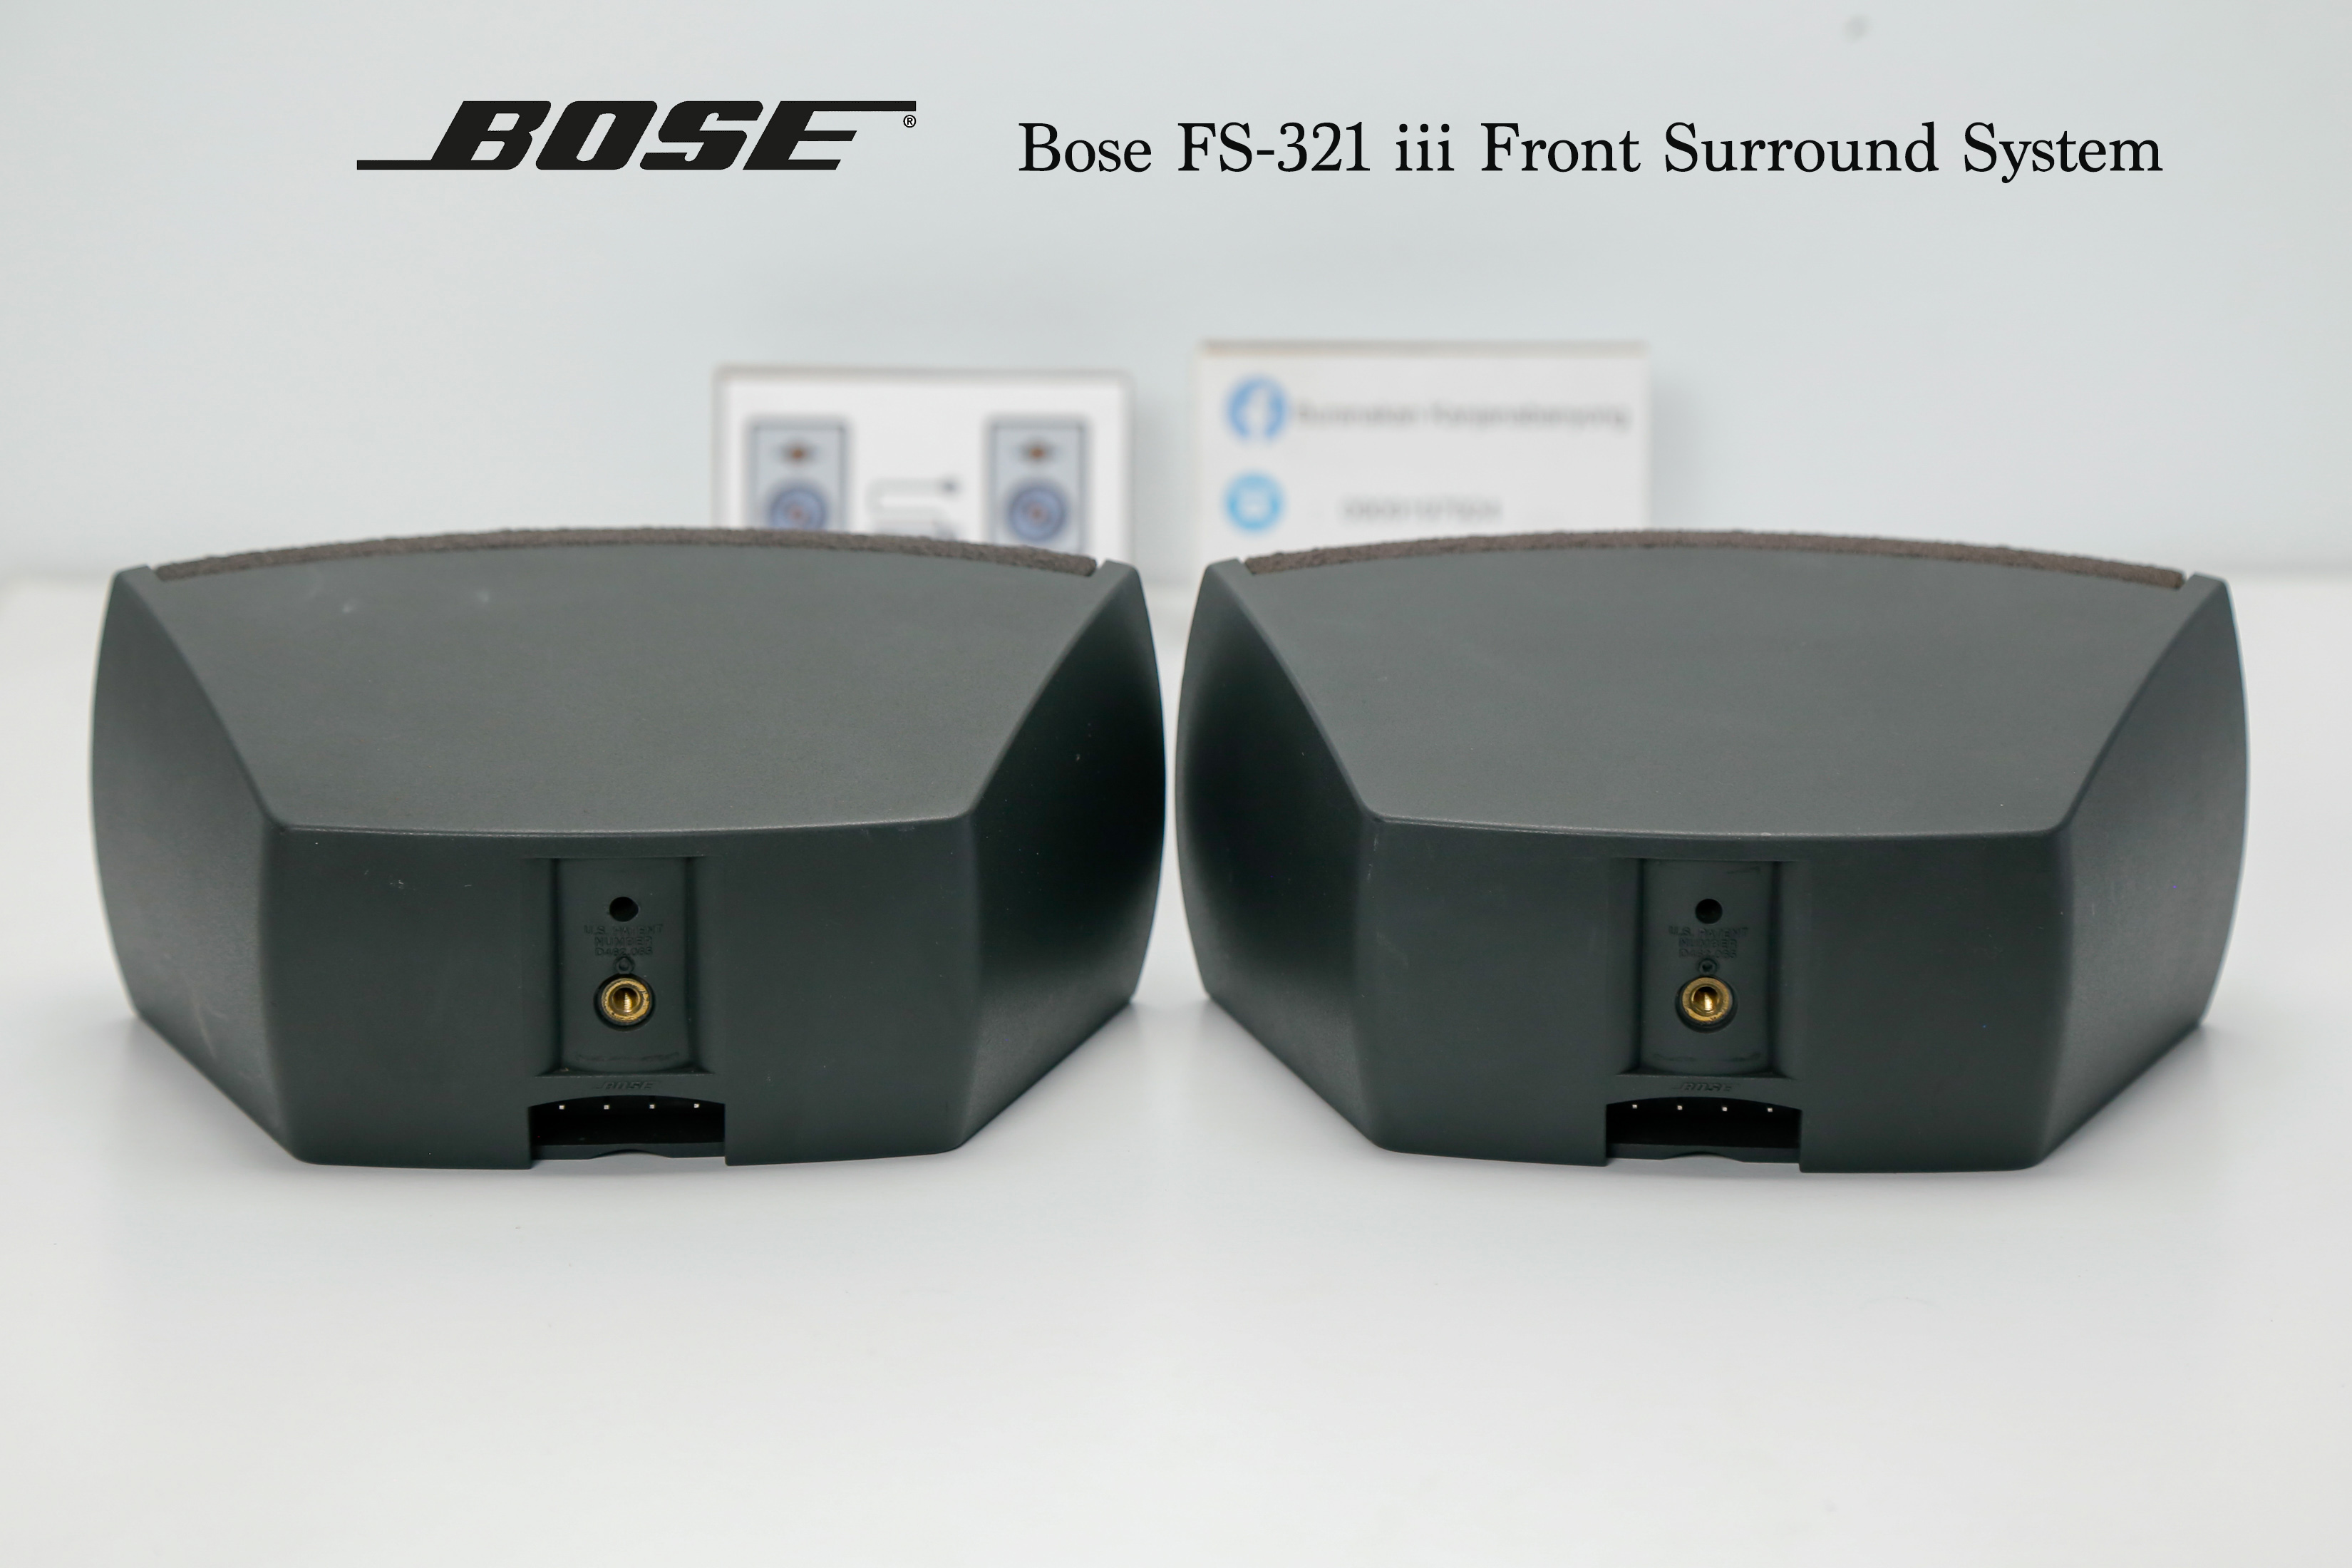 BOSE FS-321 front surround system上部にキズあり - その他